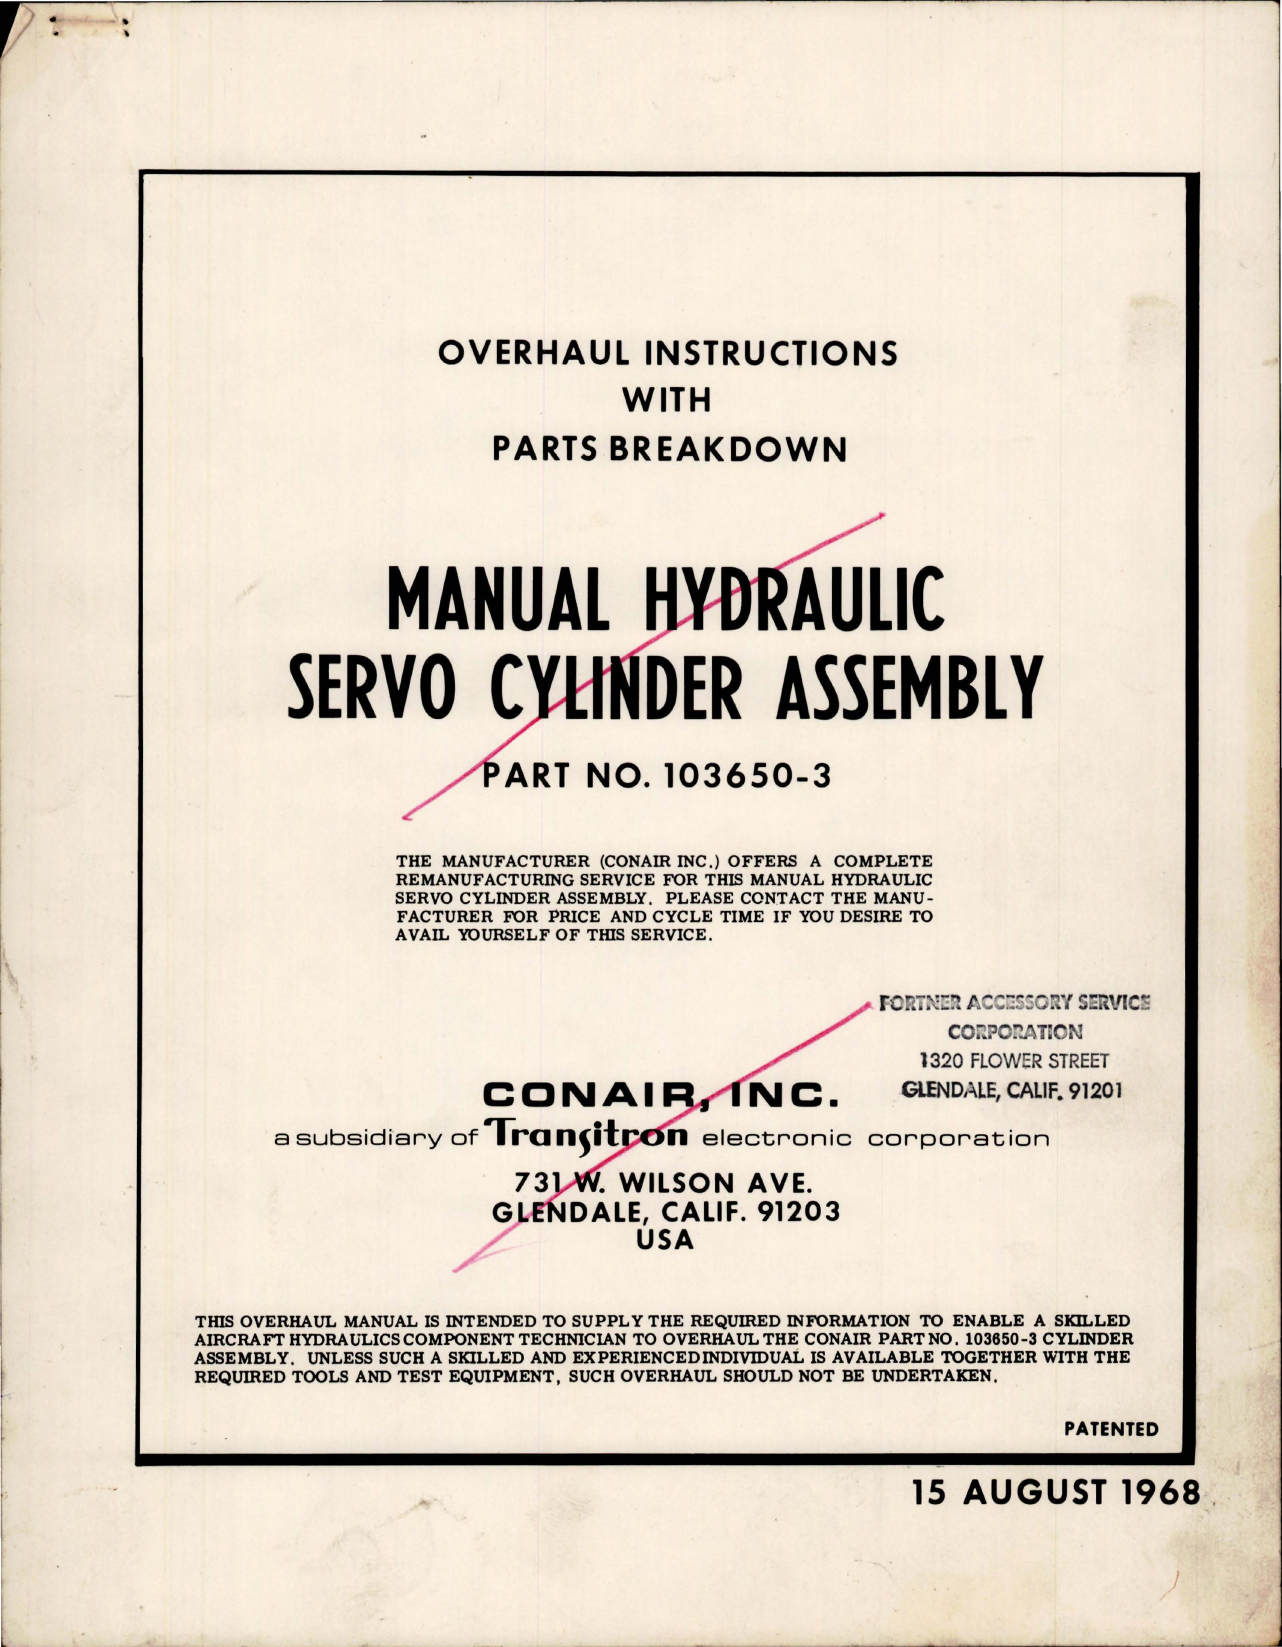 Sample page 1 from AirCorps Library document: Overhaul Instructions with Parts for Manual Hydraulic Servo Cylinder Assembly - Part 103650-3 